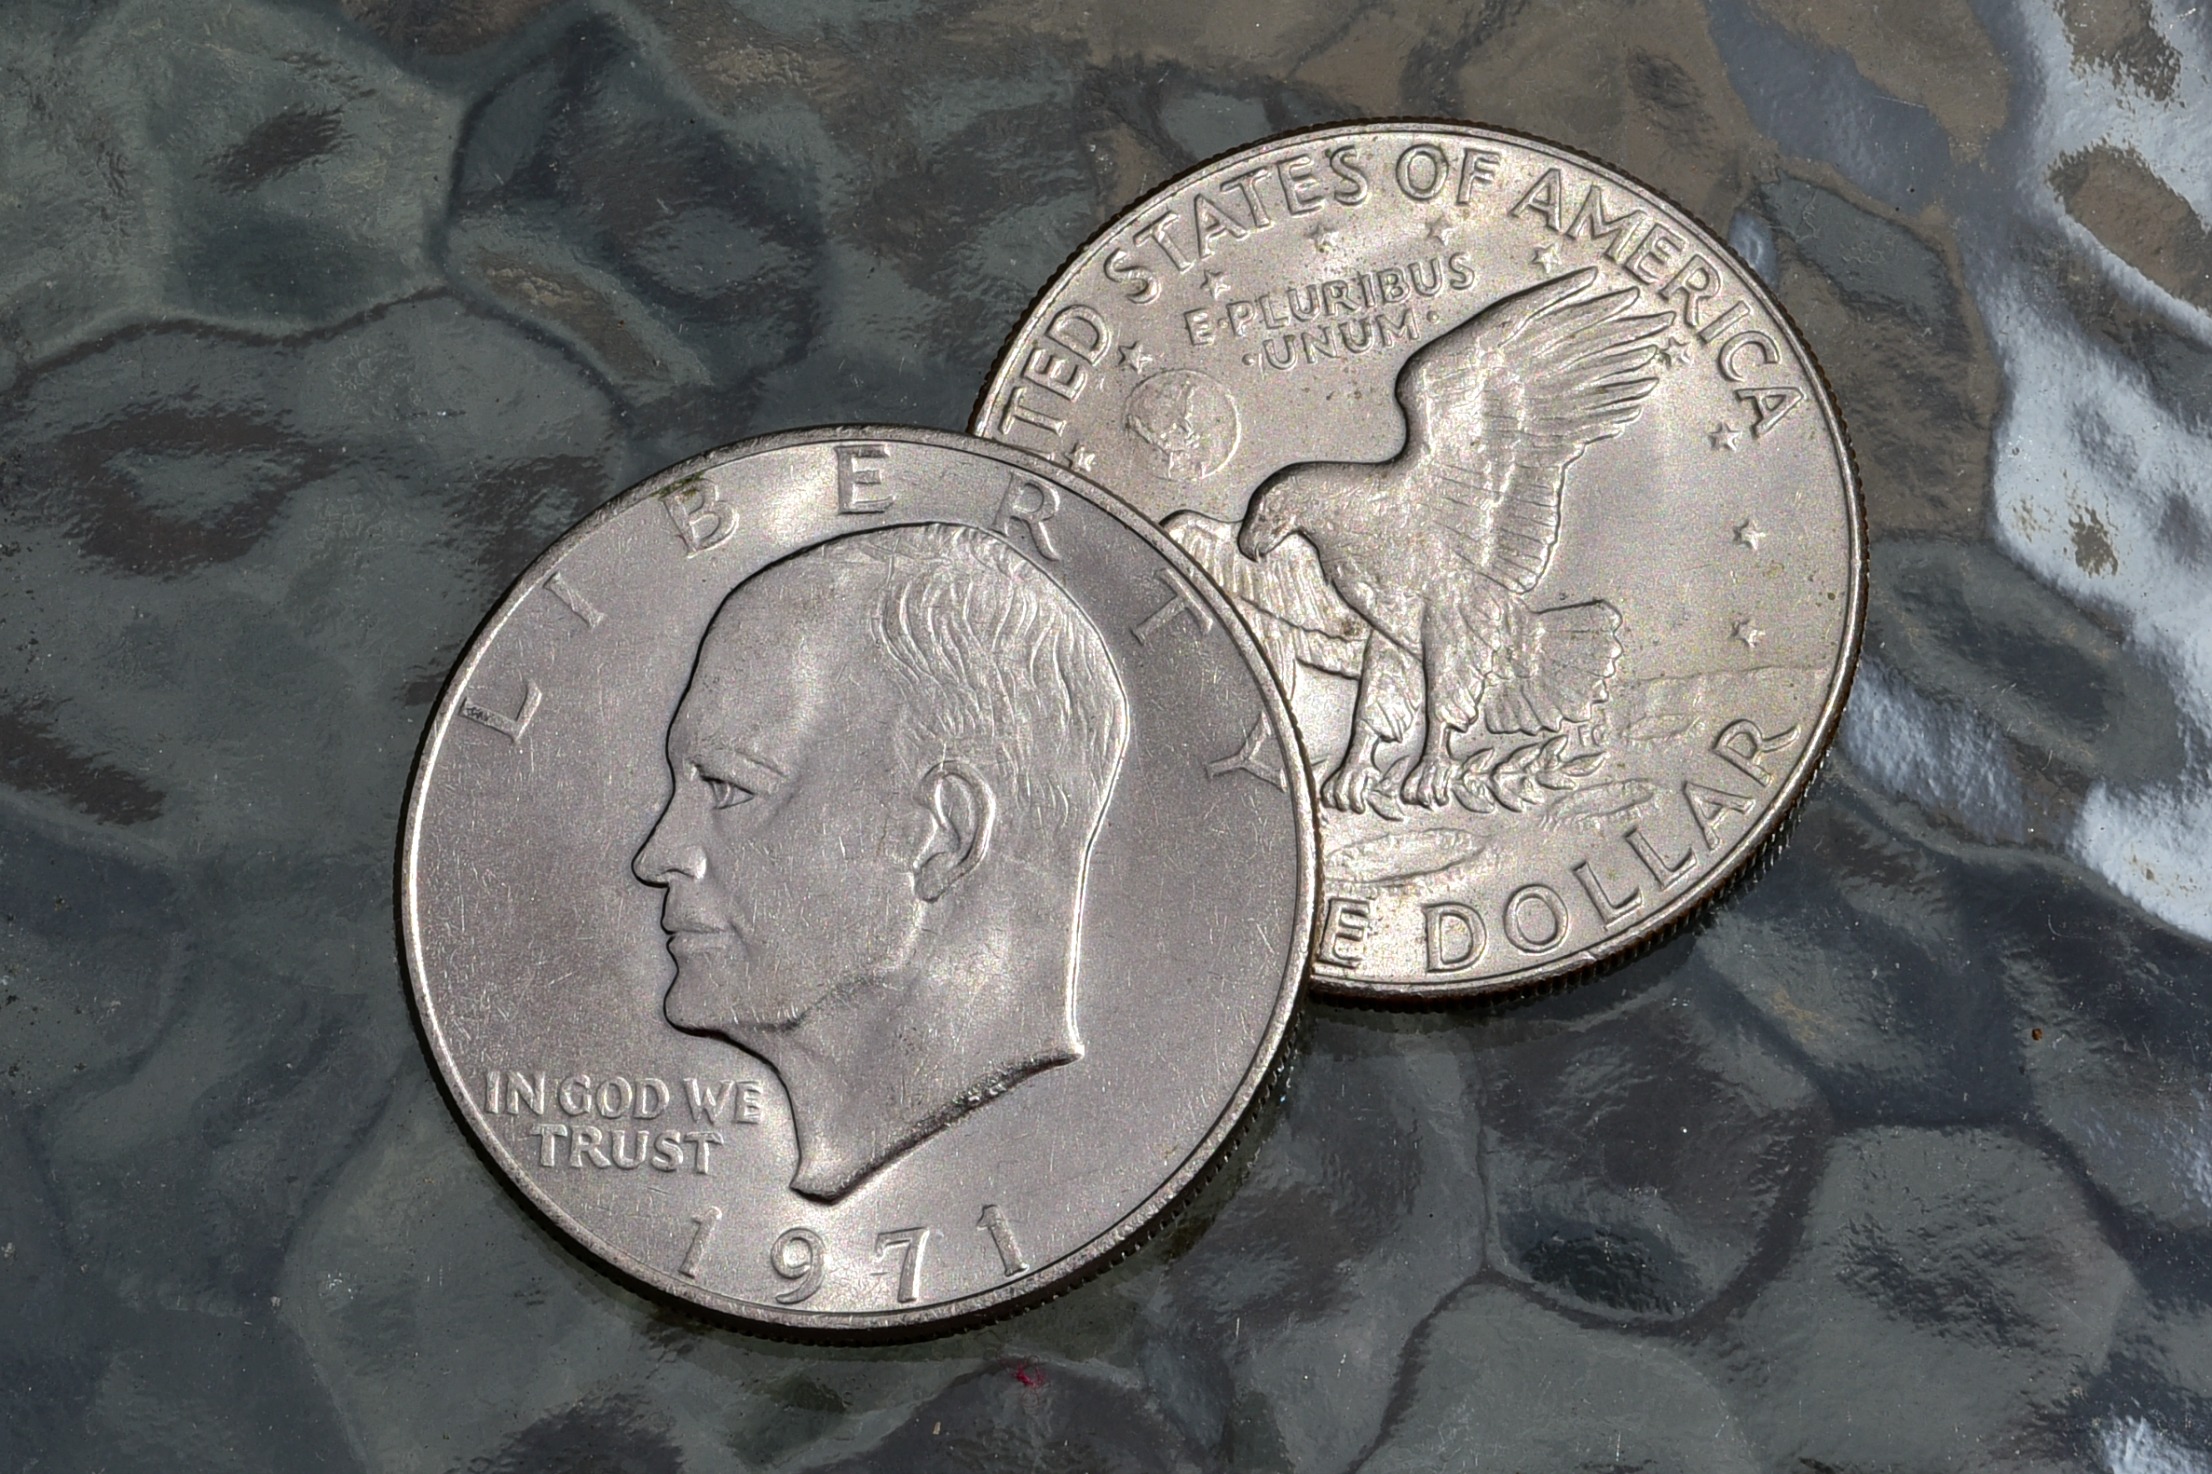 Eisenhower Dollar Errors & Varieties Worth $5,000+… Here’s What To Look For On Your Eisenhower Dollar Coins!